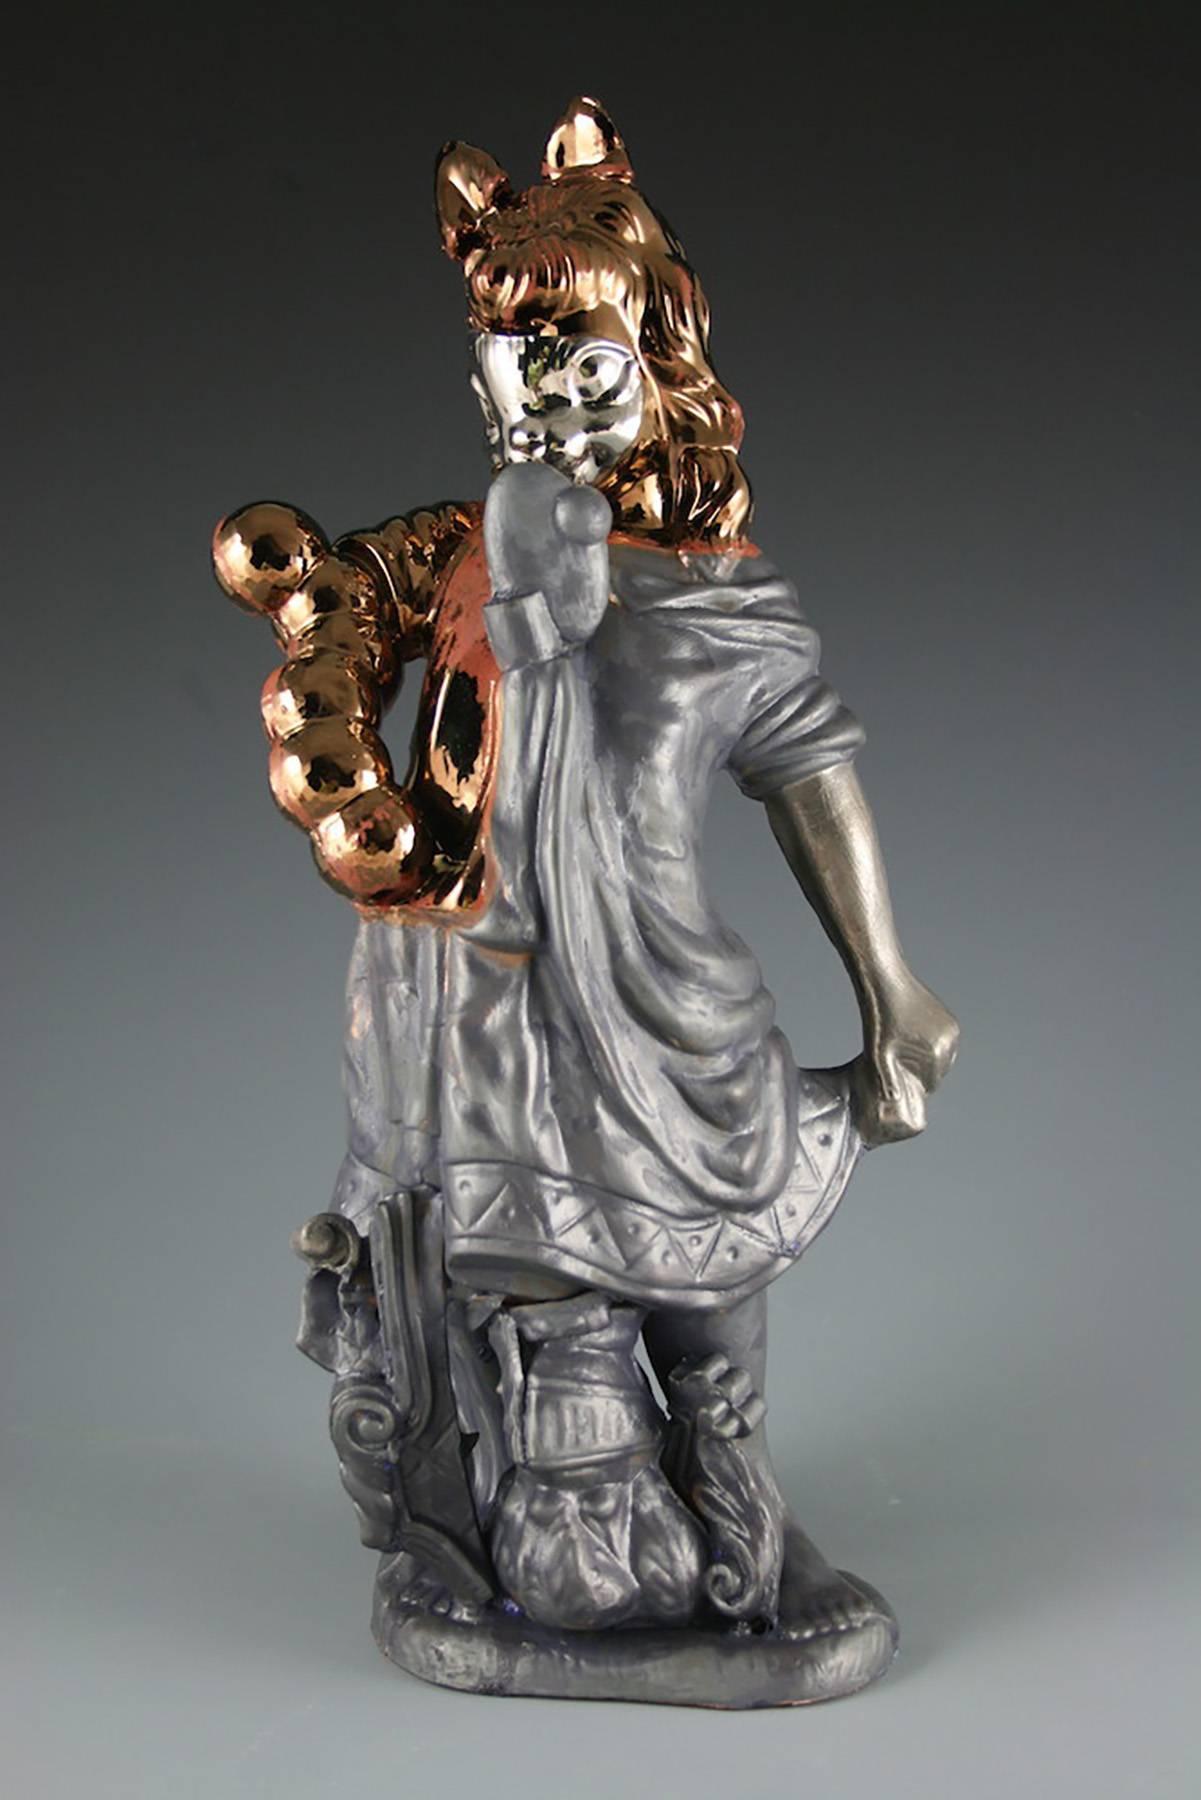 Contemporary Earthenware Sculpture with Gold Luster and Glaze - Gray Figurative Sculpture by Paul McMullan